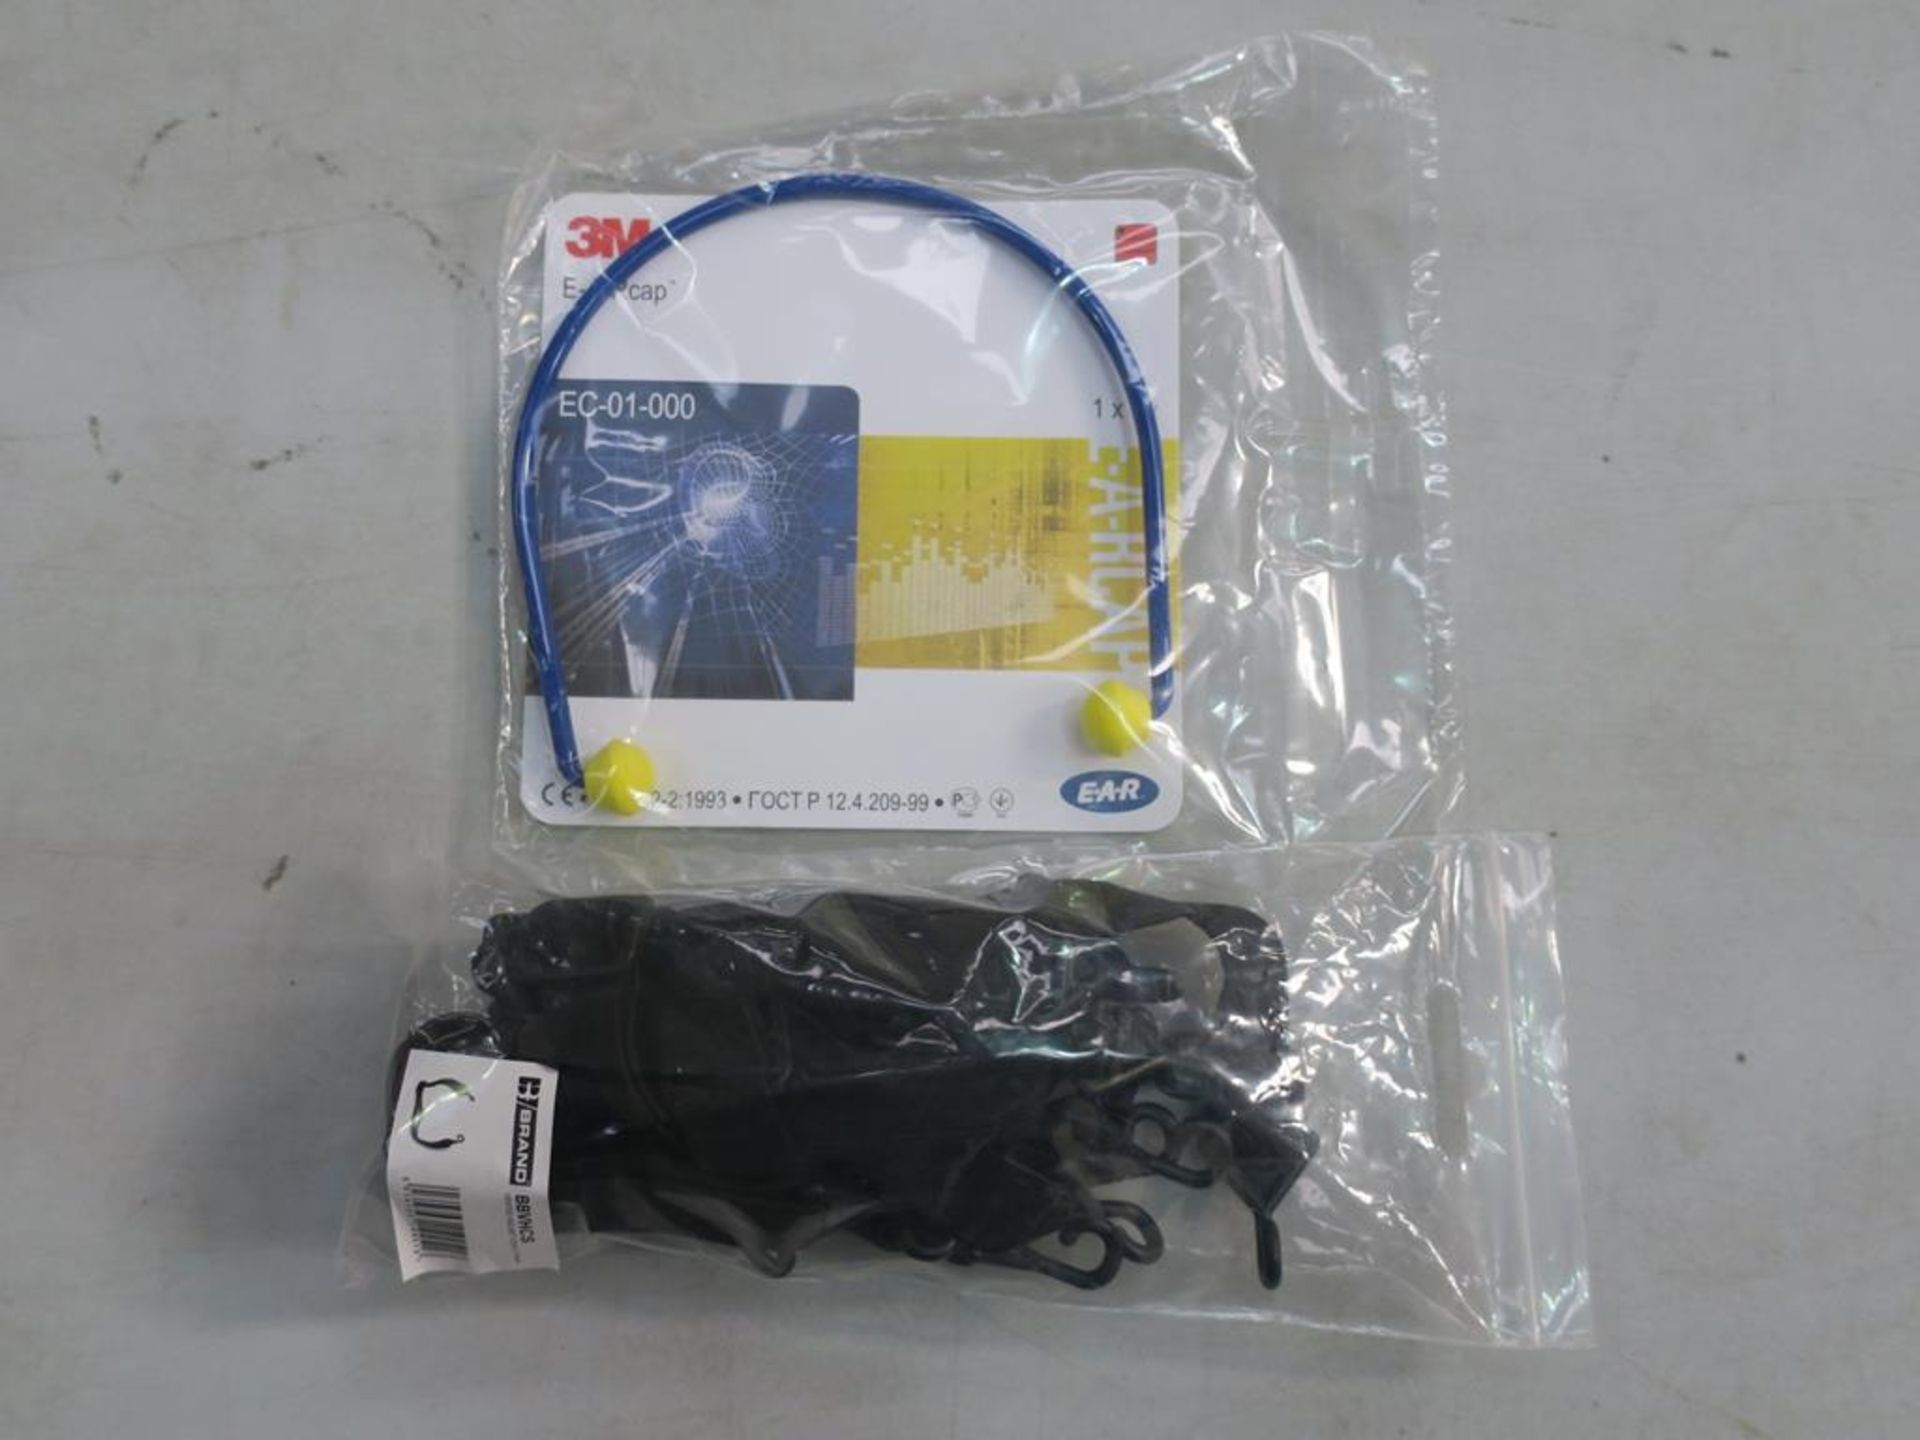 * A mixed lot of Safety Equipment: a box of 3m E-A-R Cap Ear Defenders, two packs of 'Vented - Image 3 of 3